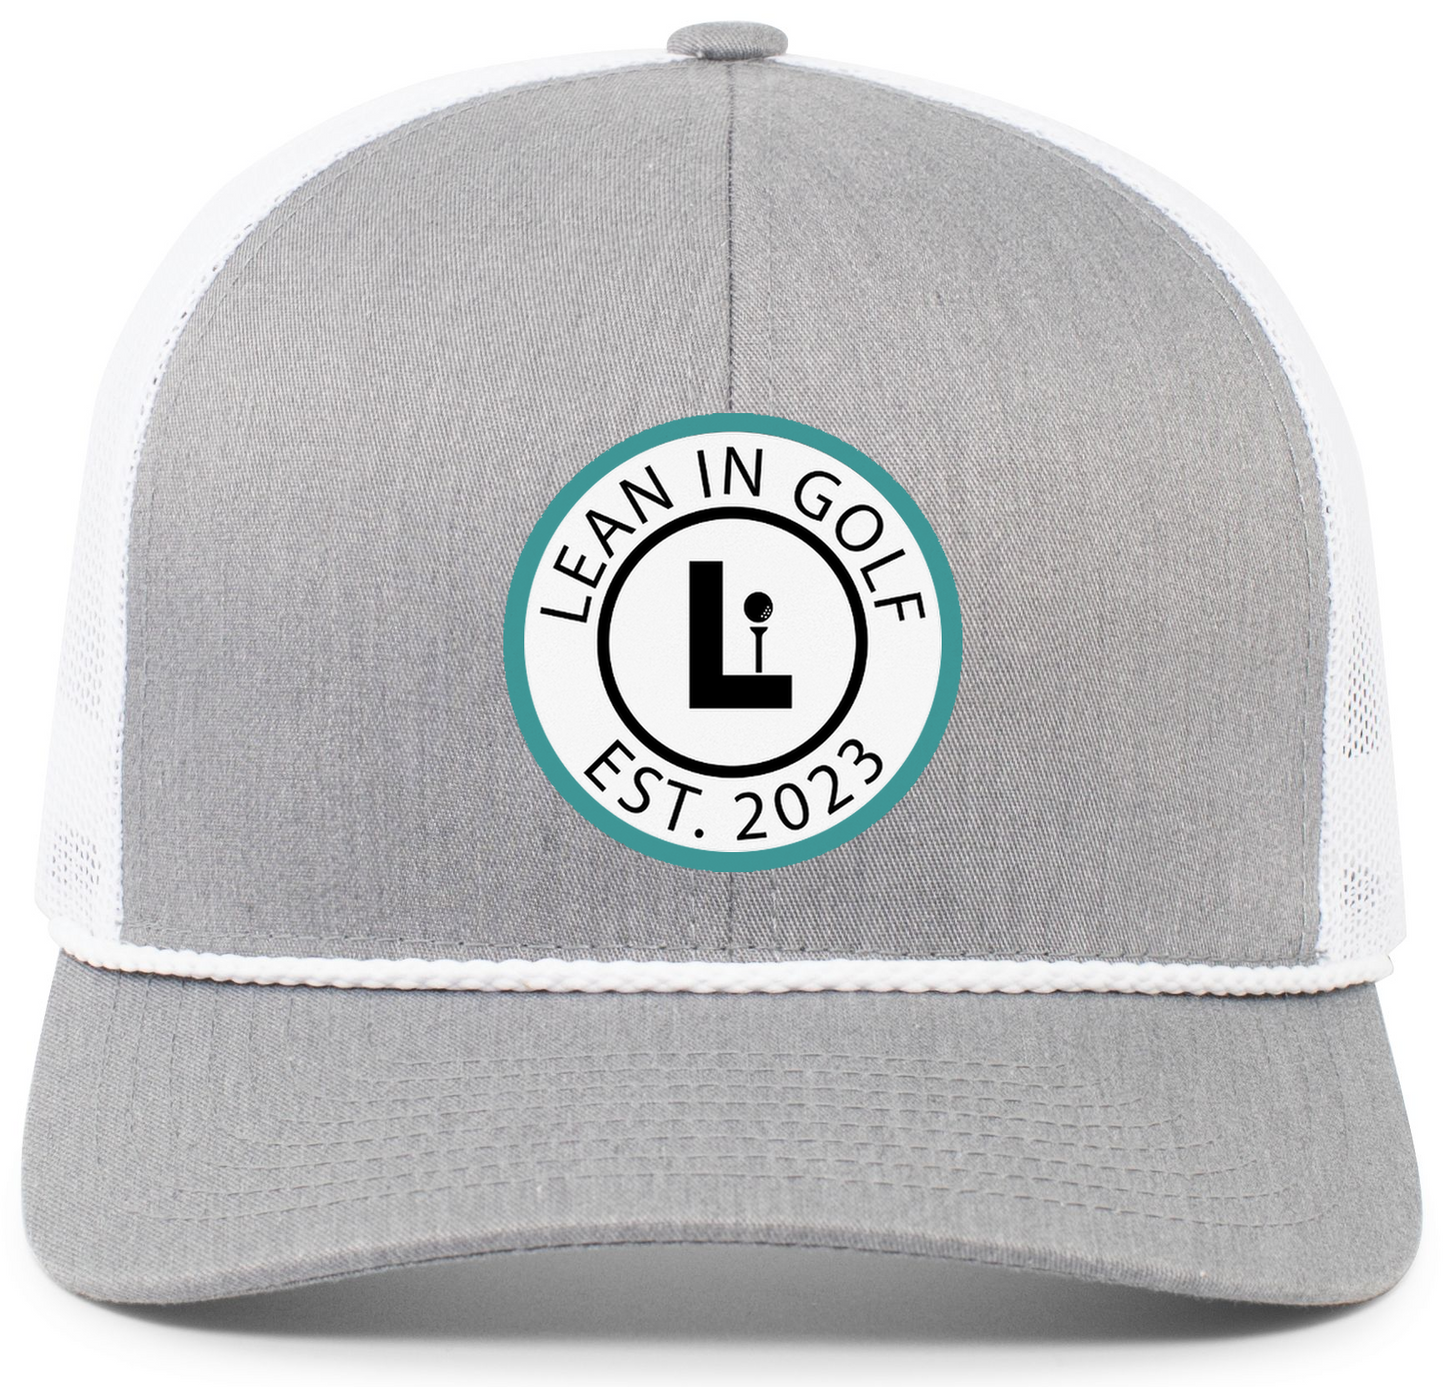 Lean In Circle Logo White/Grey Trucker hat with Teal Circle